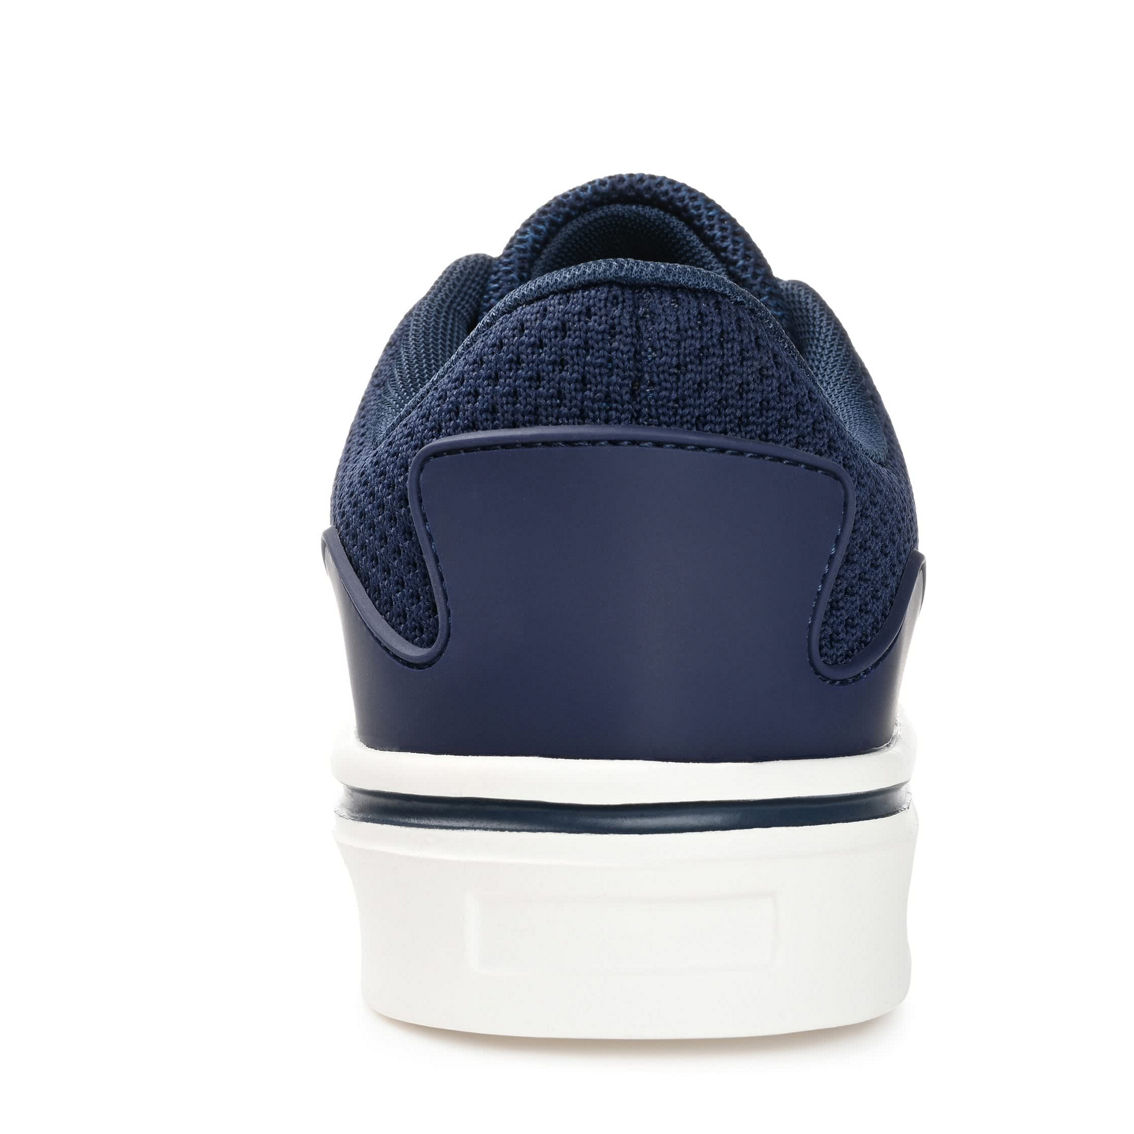 Vance Co. Desean Knit Casual Sneaker - Image 3 of 5